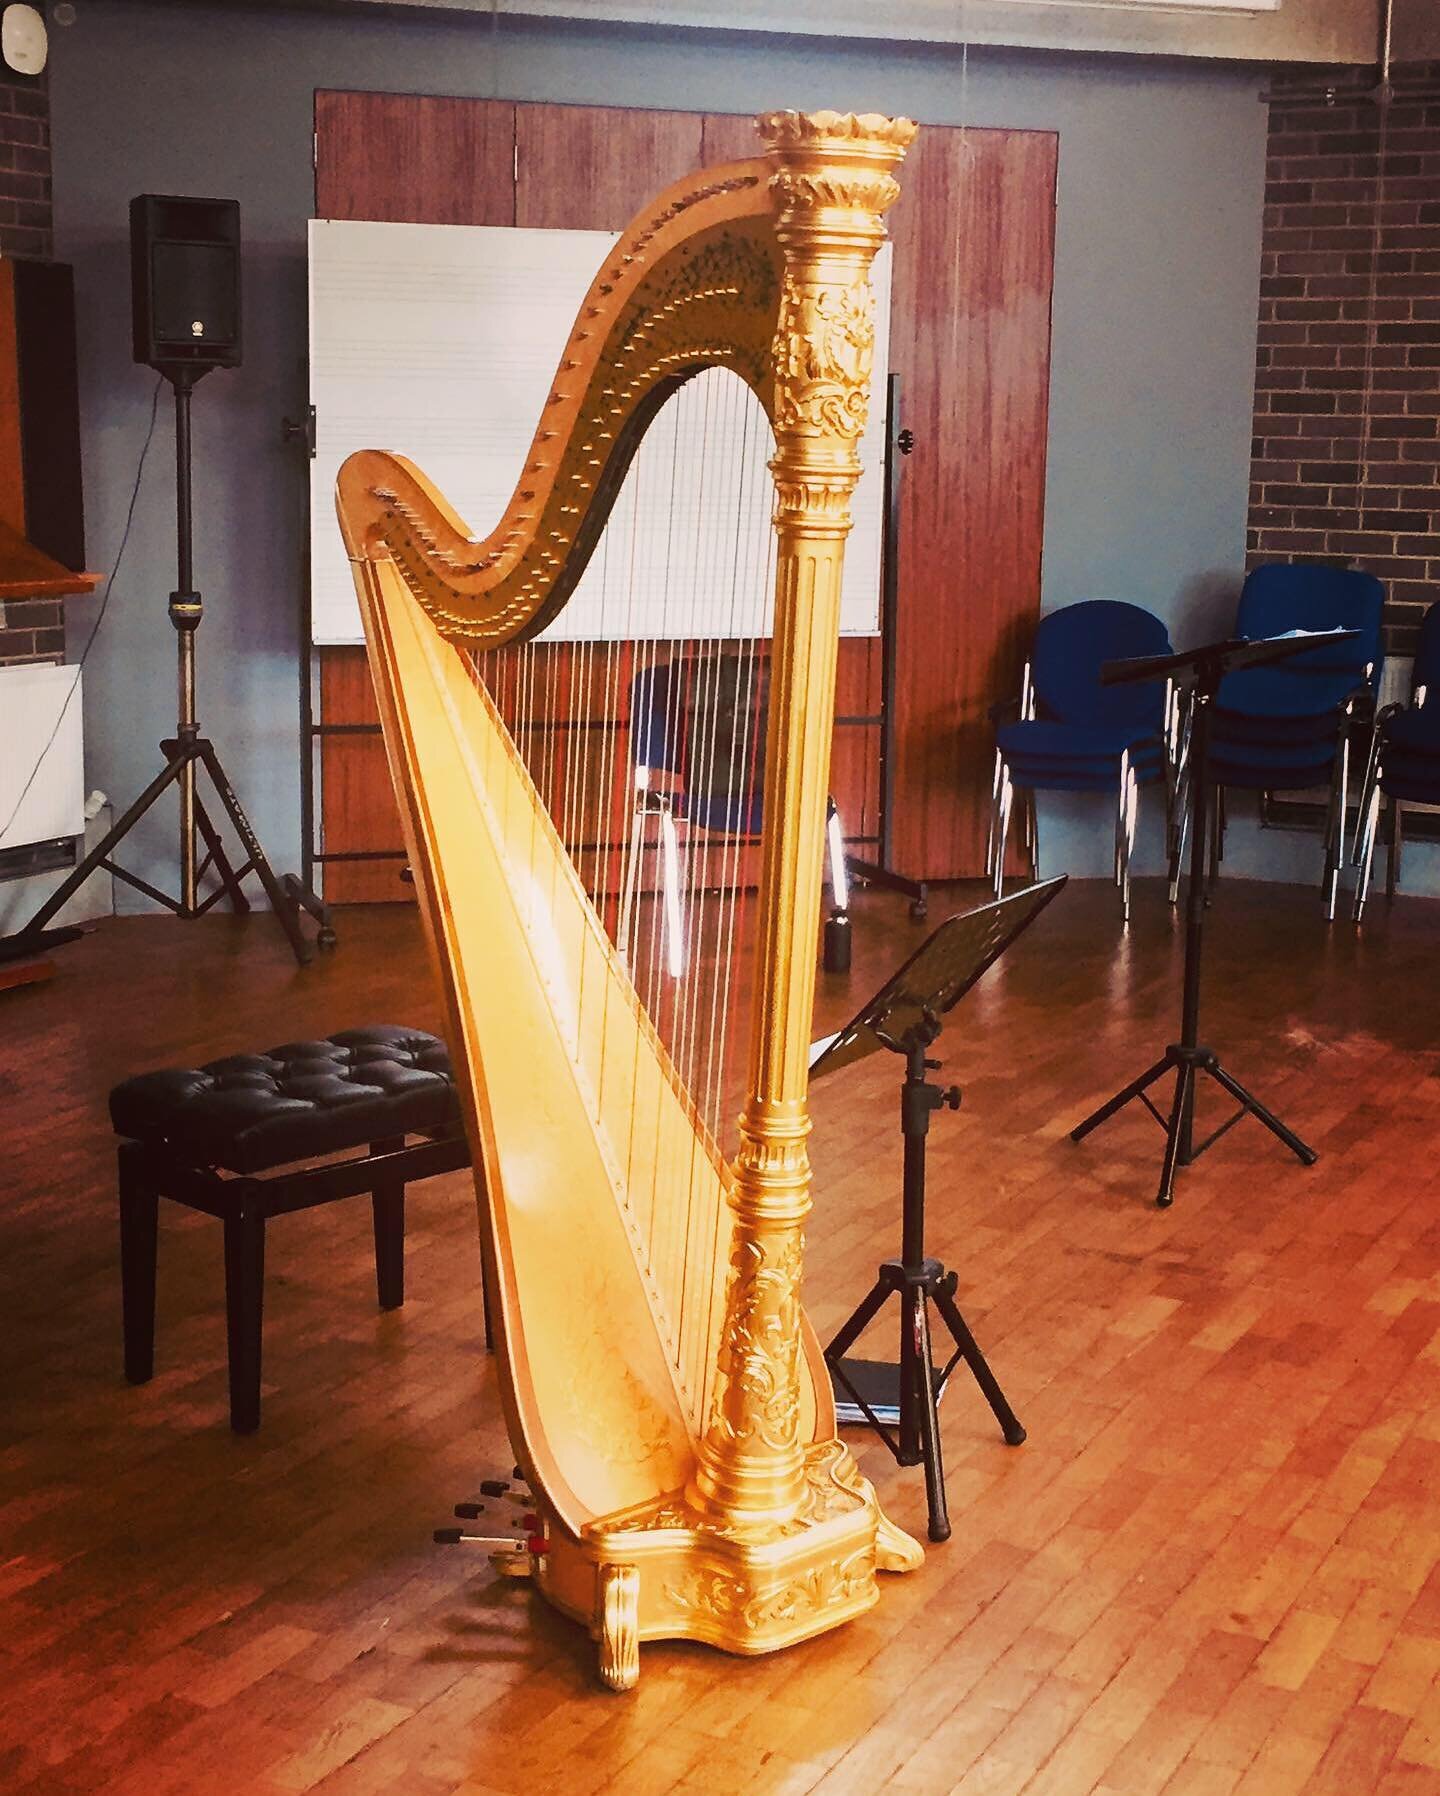 Wednesday&rsquo;s Lunchtime Recital @dublincityuniversity was so much fun. A wonderful and receptive audience😊

My sincere thanks to Harpist Teresa O&rsquo;Donnell. A joy to work and perform with😊 looking forward to many more future performances to